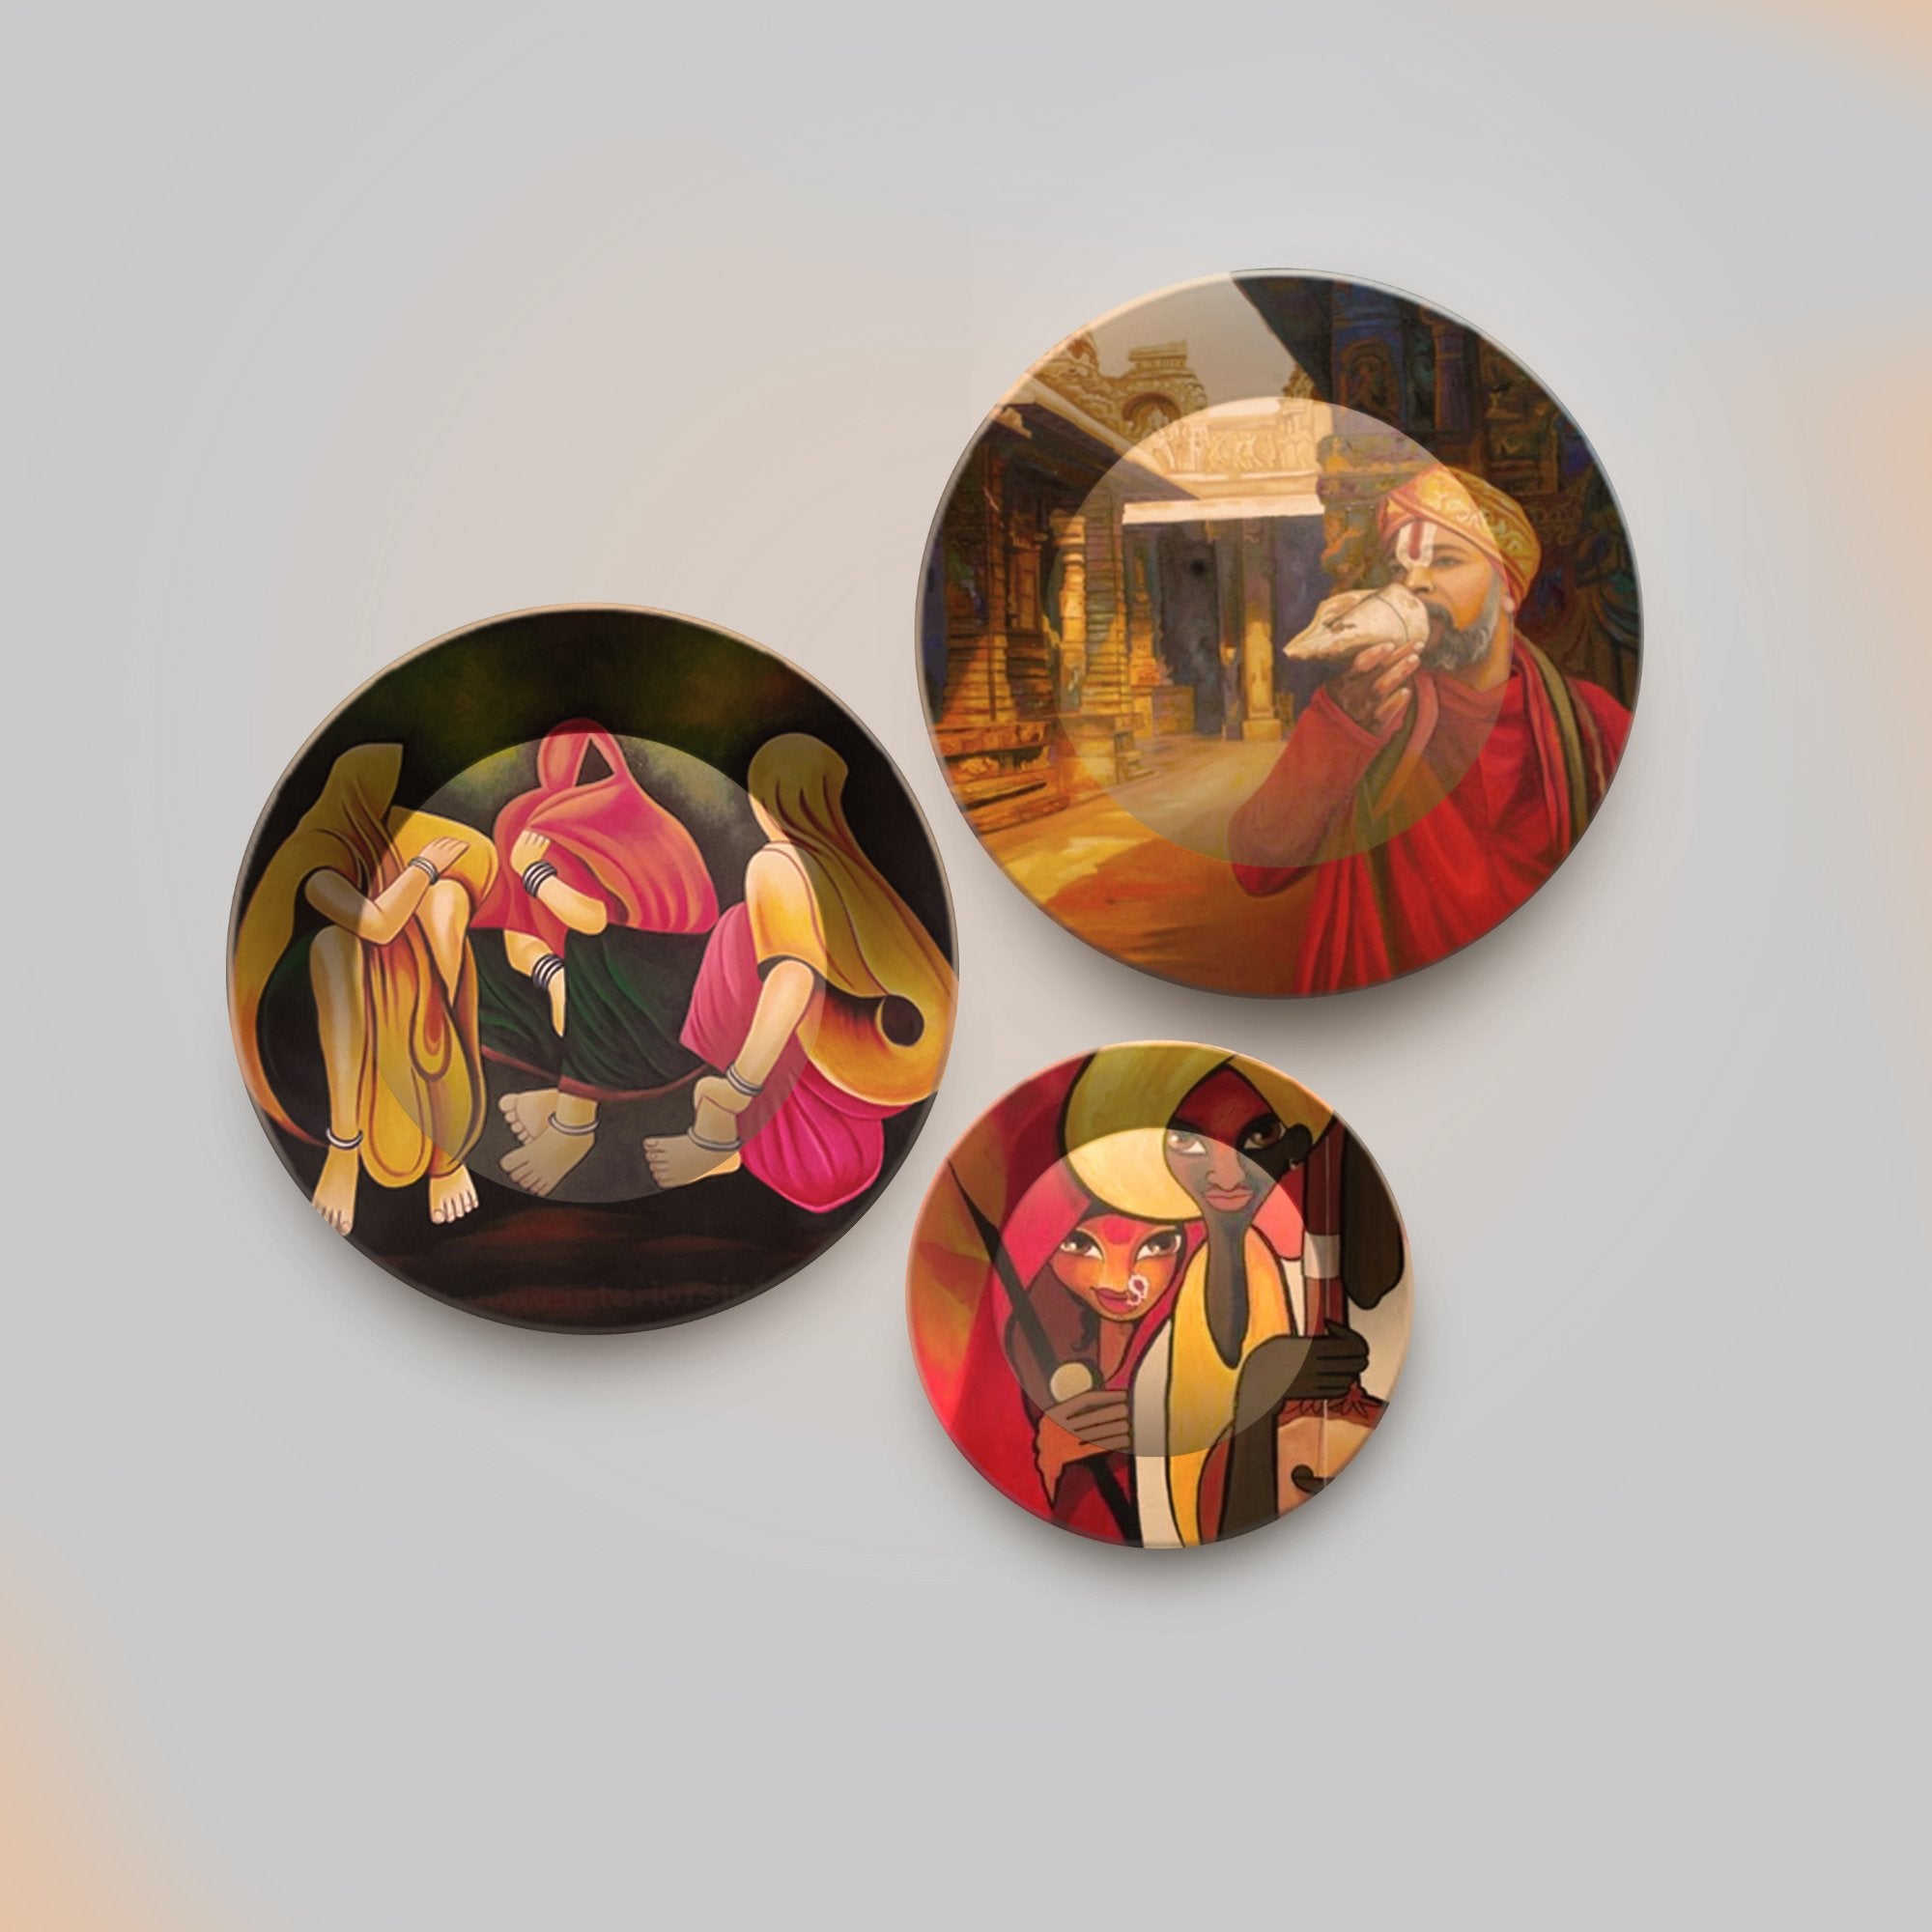  3 Pieces Ceramic Wall Plates Painting of Indian Culture and Modern Art